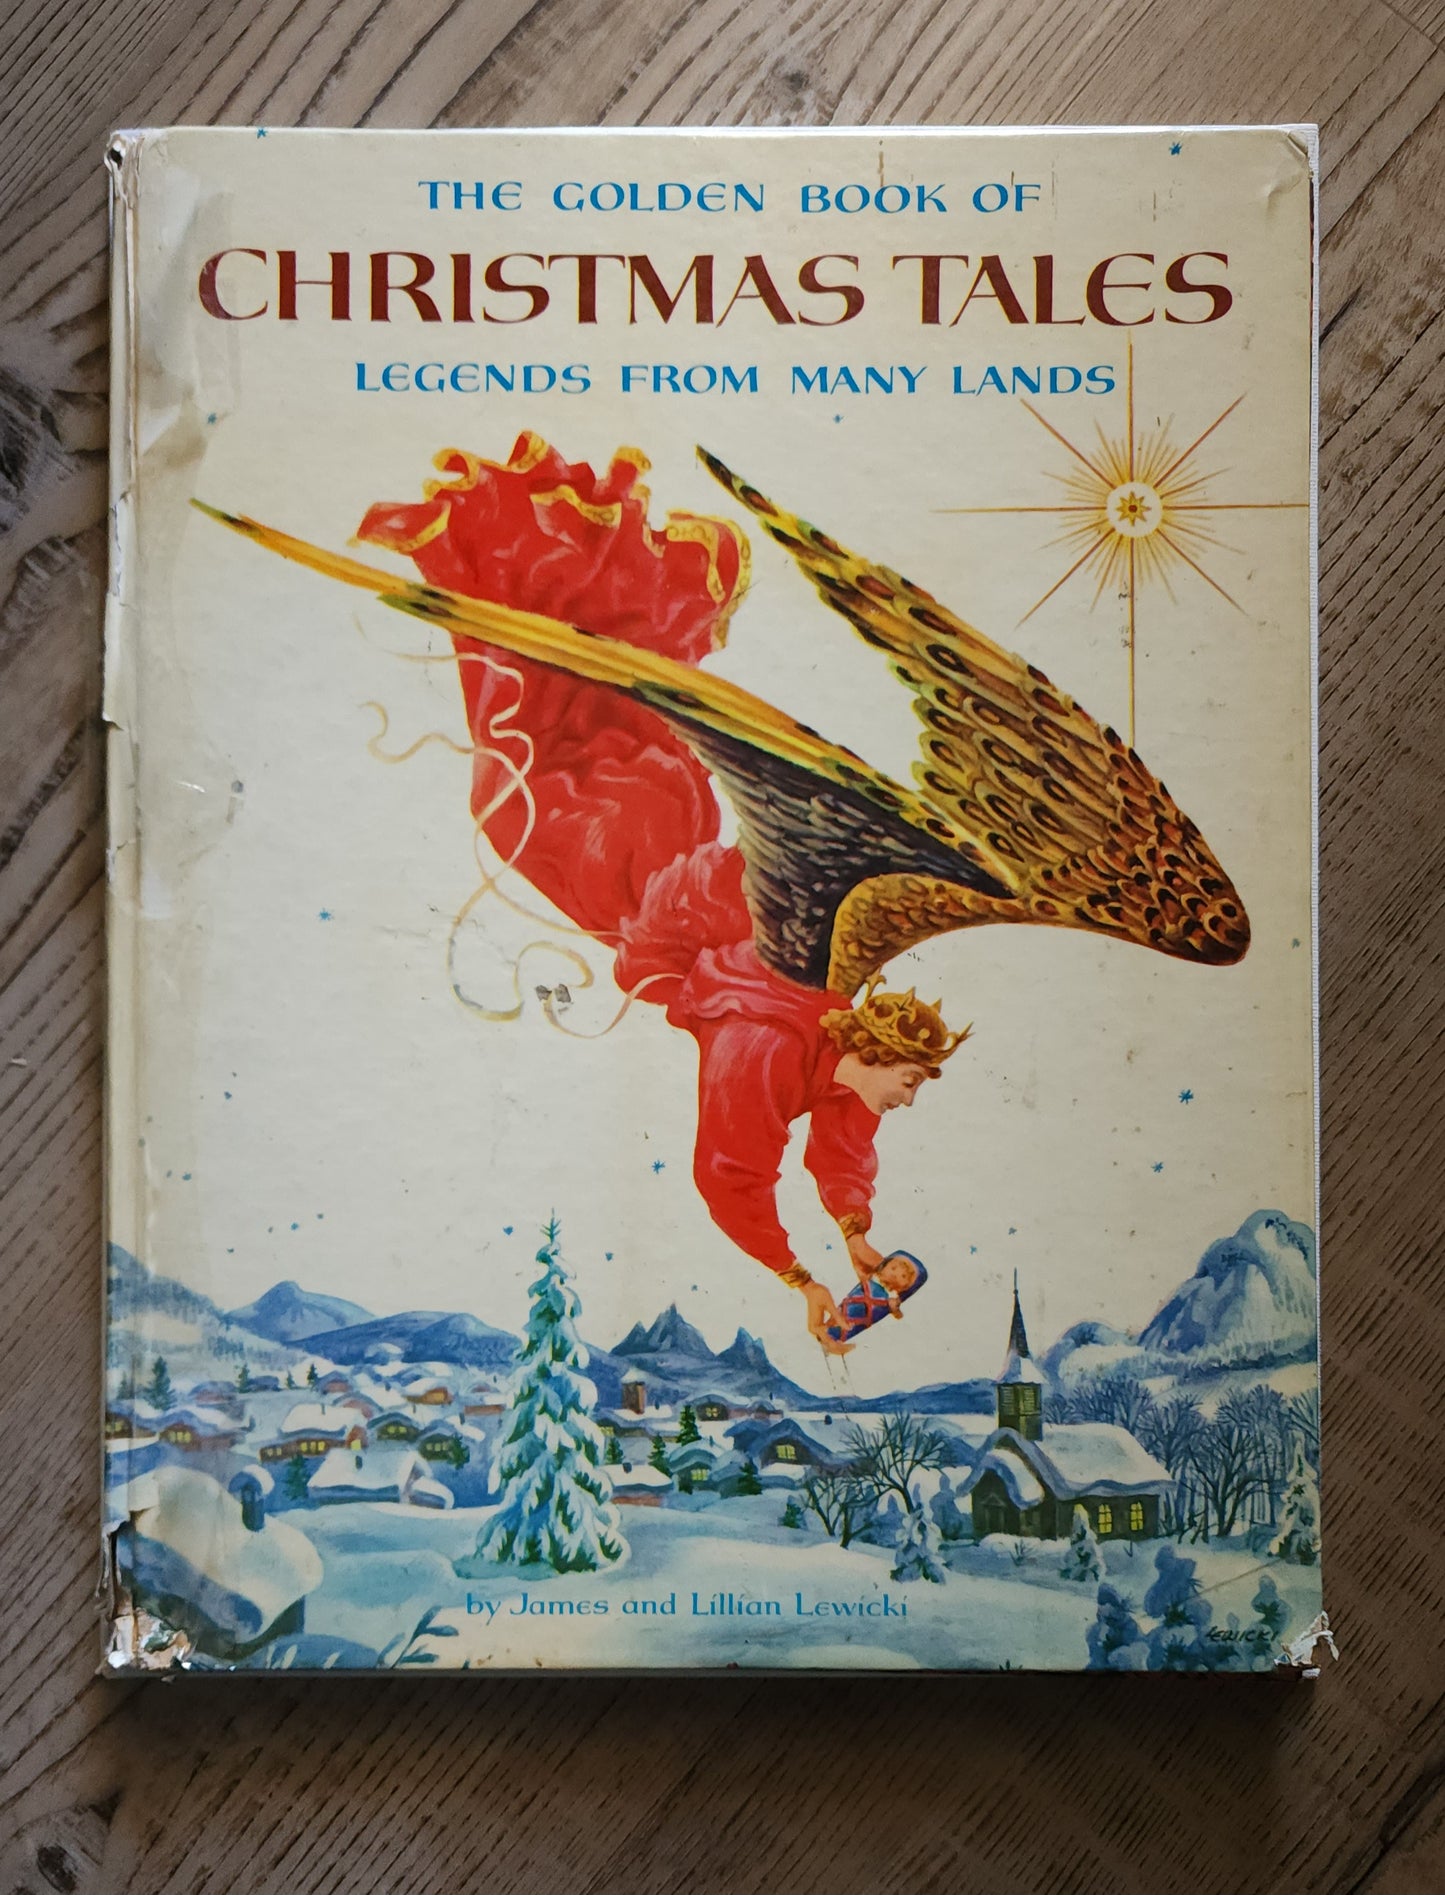 The Golden Book of Christmas Tales: Legends from Many Lands James & Lillian Lewicki Golden Press hardcover1956